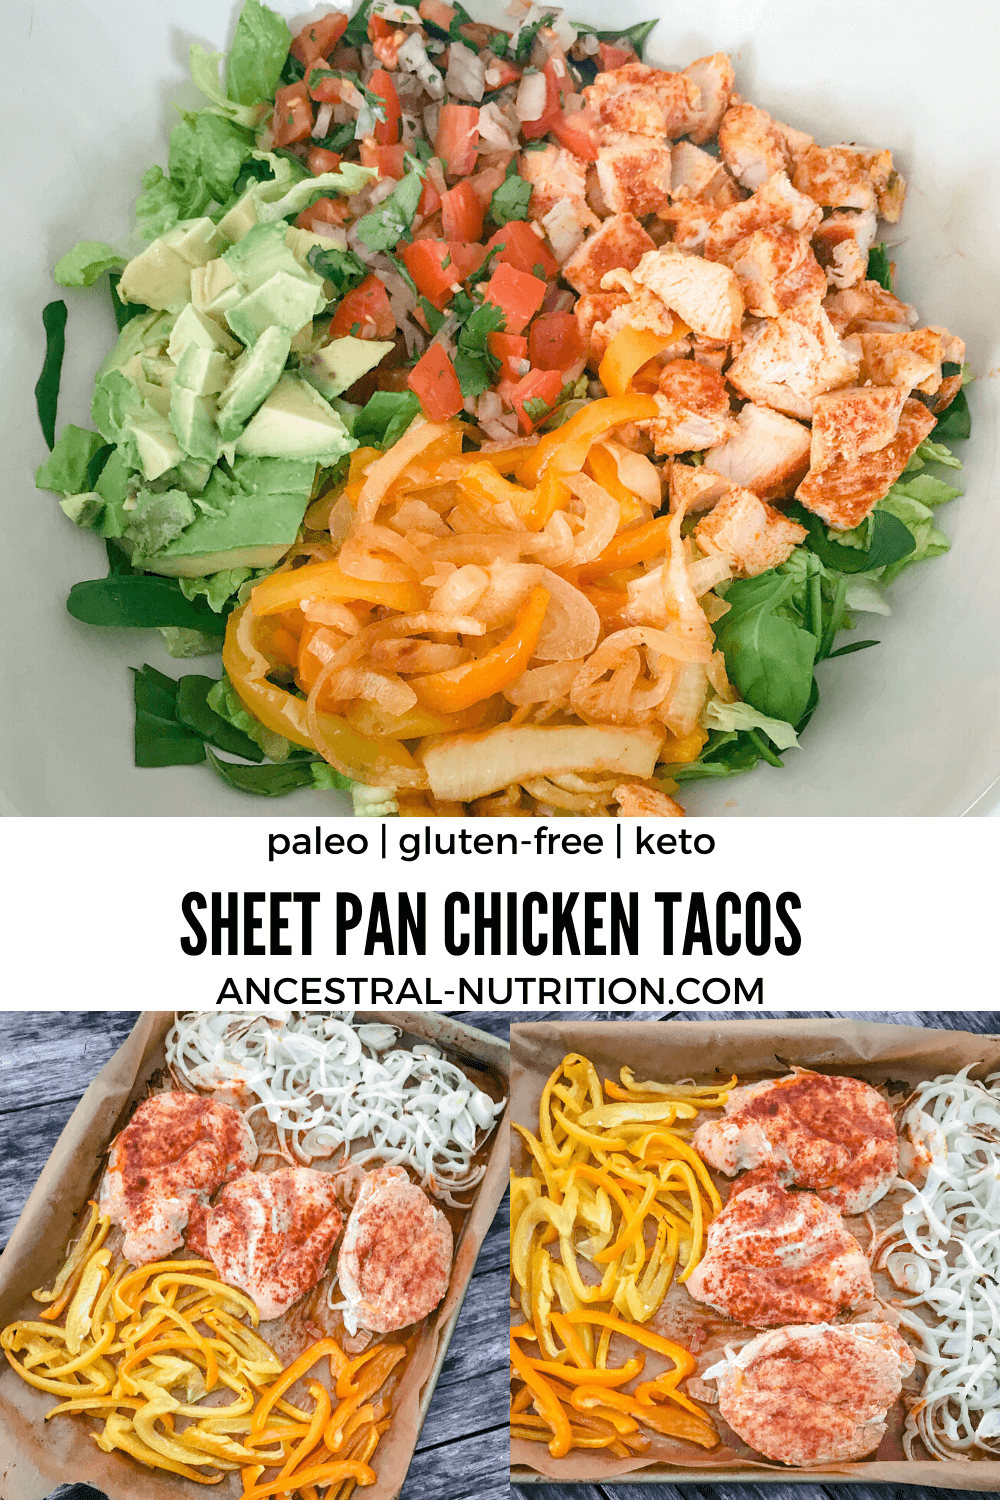 Mexican Sheet Pan Chicken Tacos (Paleo, Keto) - Ancestral Nutrition